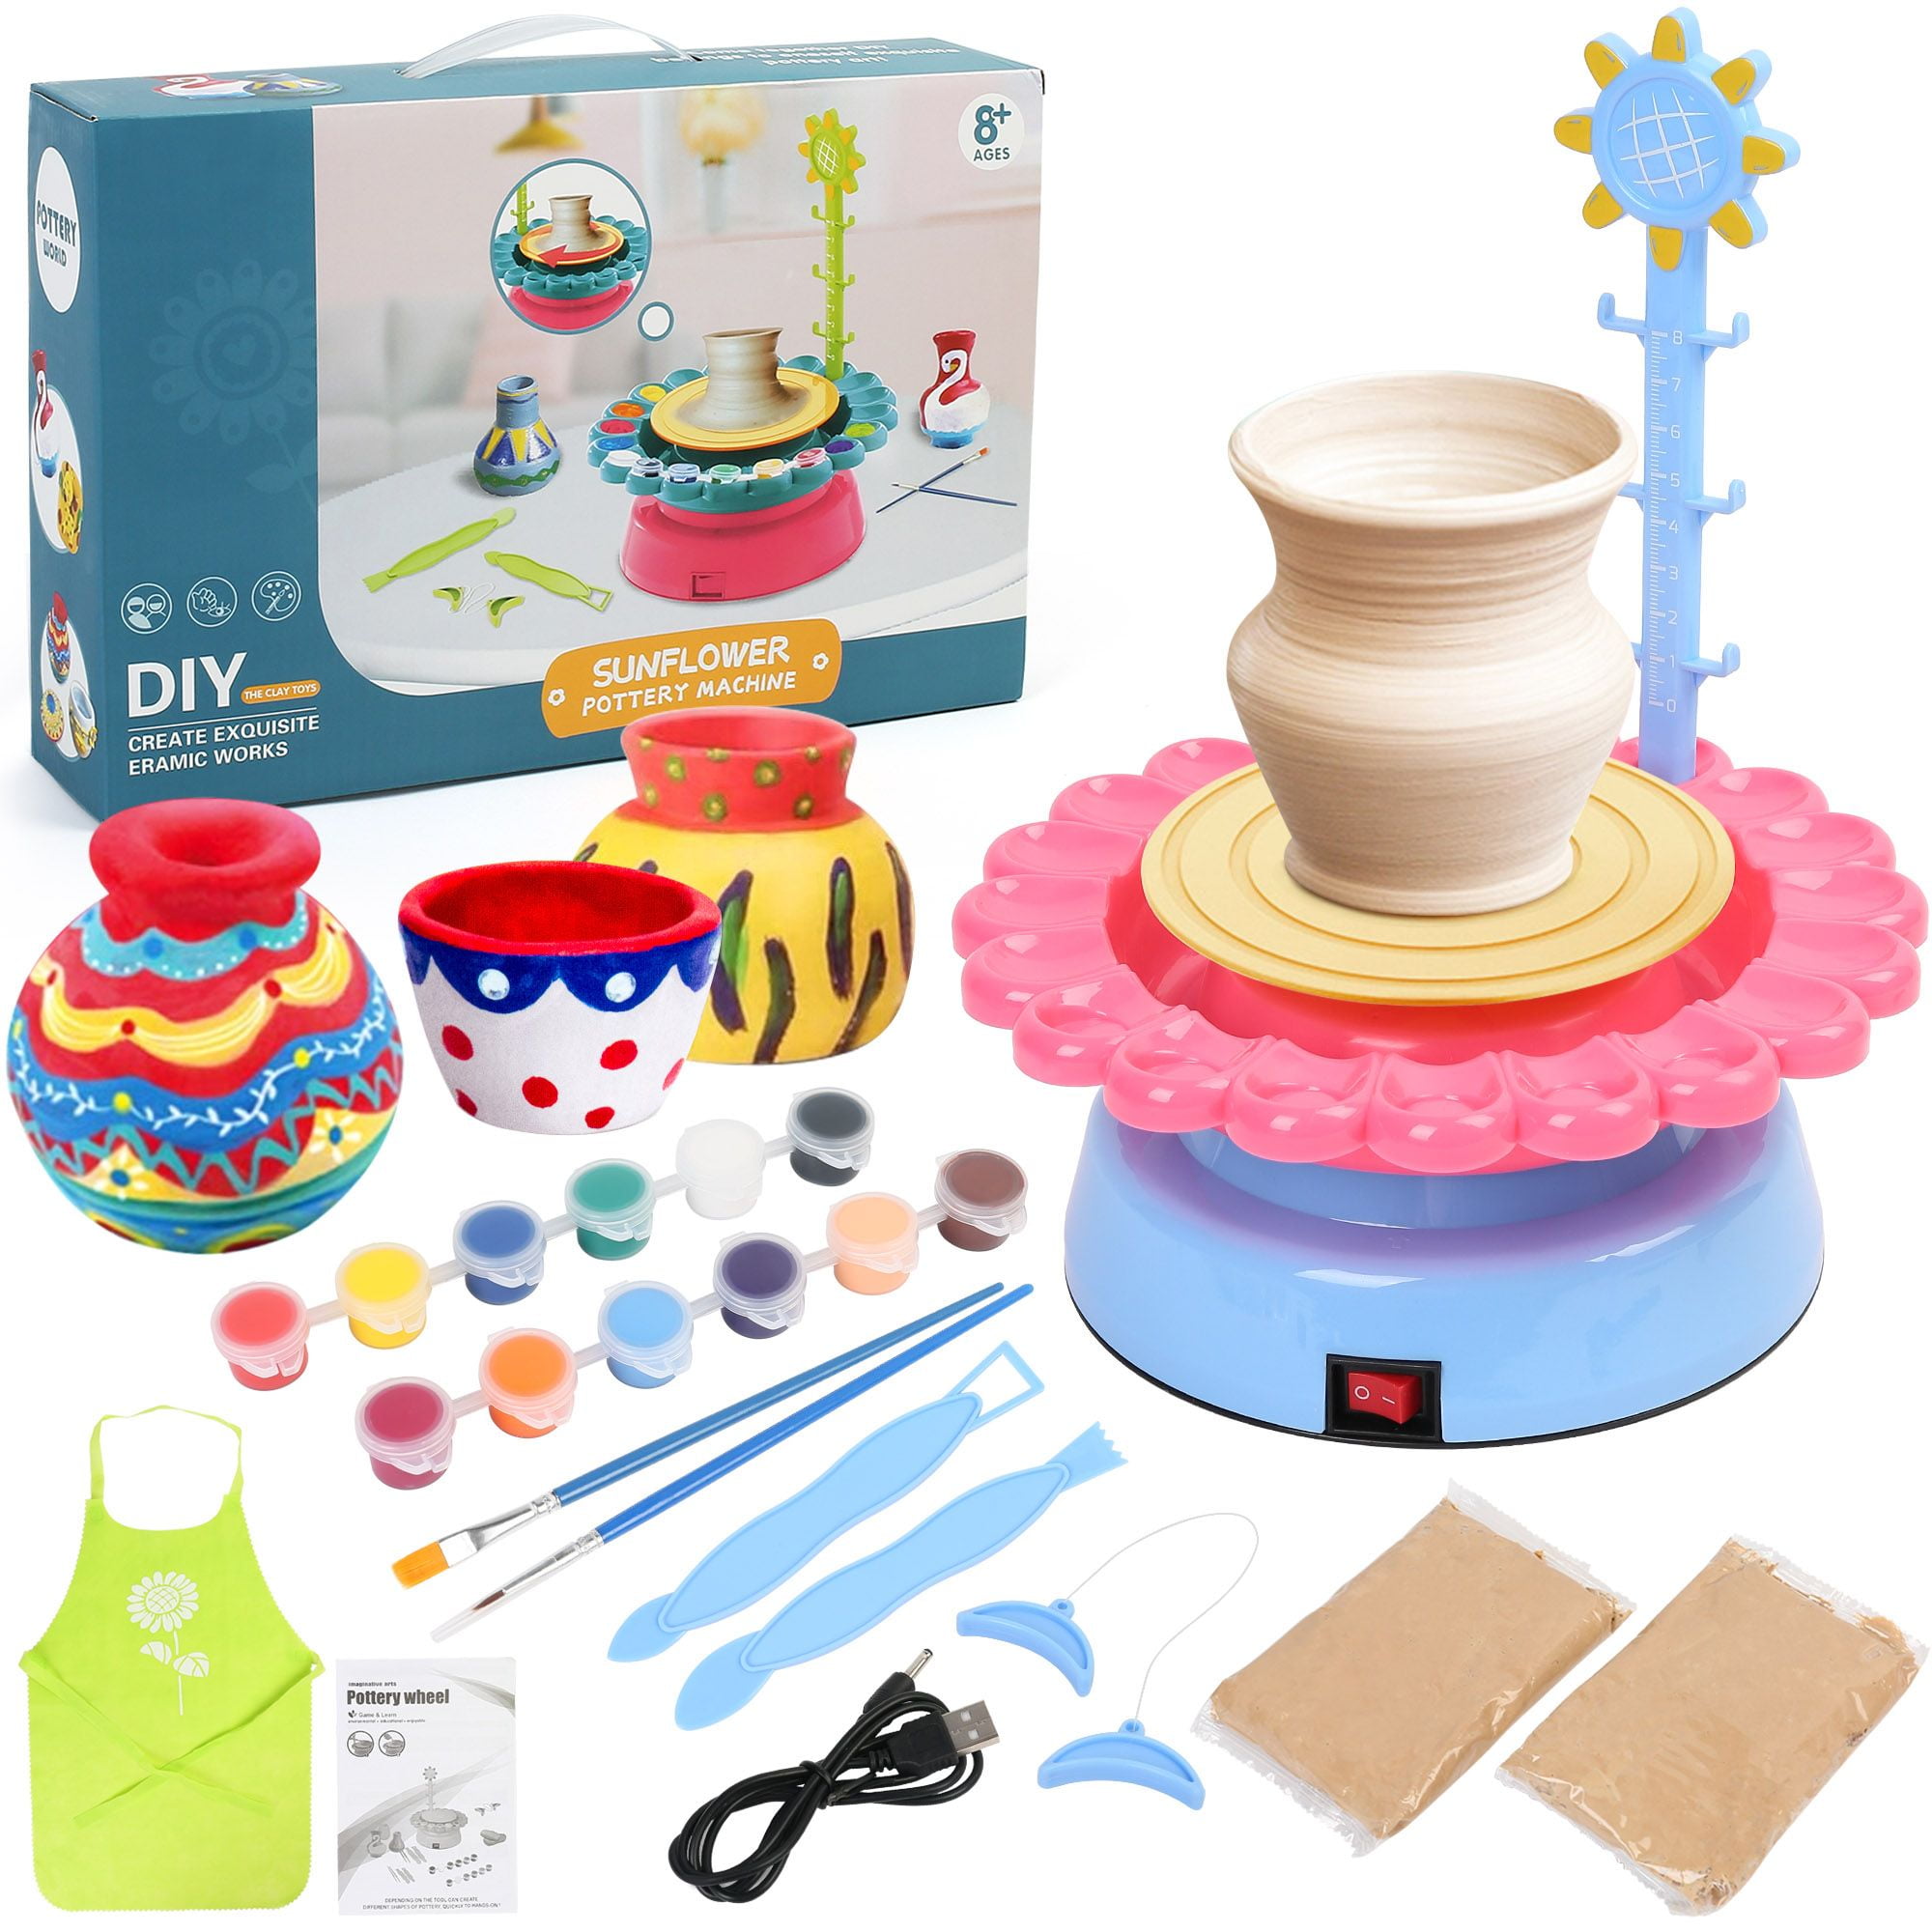  ToyUnited Pottery Wheel for Kids: Complete Pottery Kit for  Beginners with Air Dry Clay - Sculpting Clay Tools & Arts Supplies Arts -  Crafts for Girls Ages 4-8 Crafts Kits for